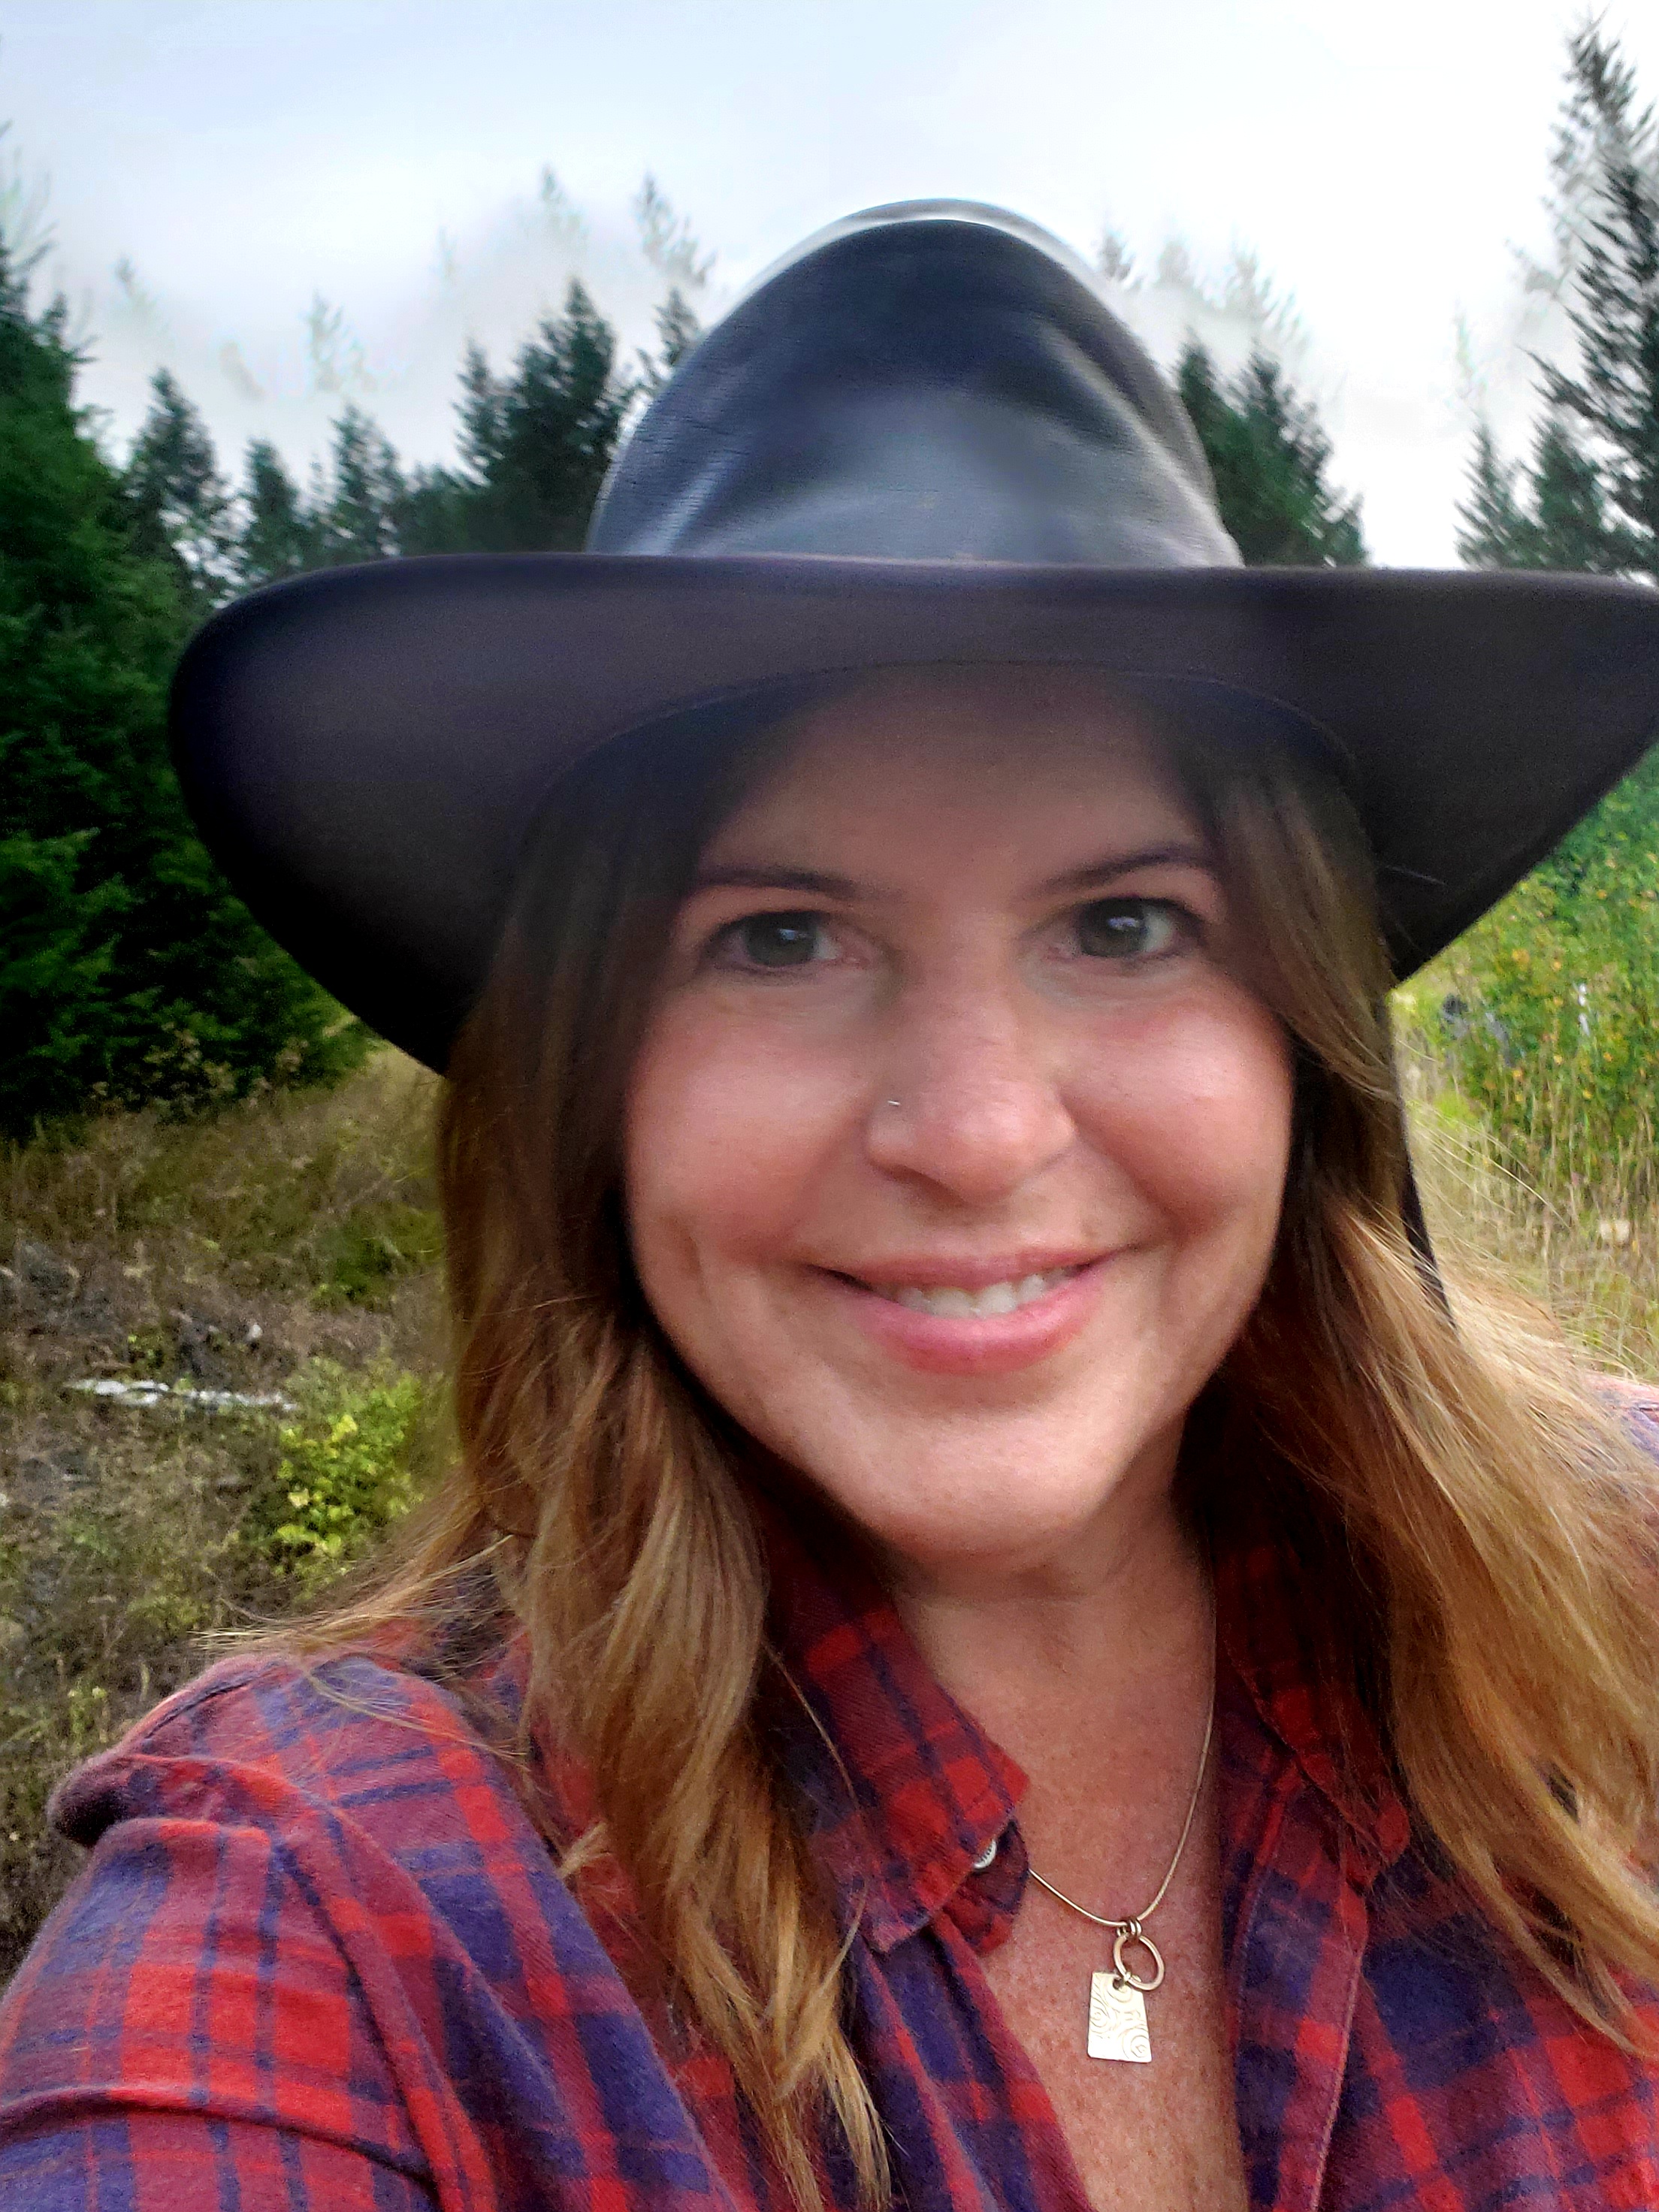 A woman with light brown hair wearing a black cowboy and a plaid shirt smiling at the camera